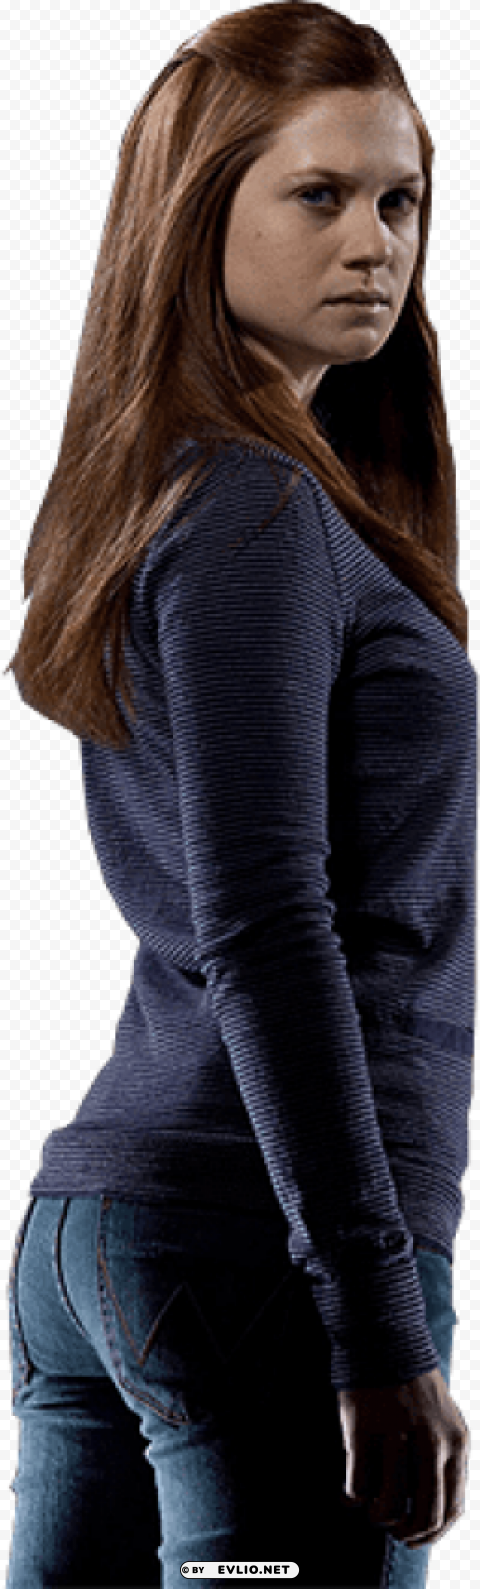 harry potter ginny Isolated Artwork on HighQuality Transparent PNG